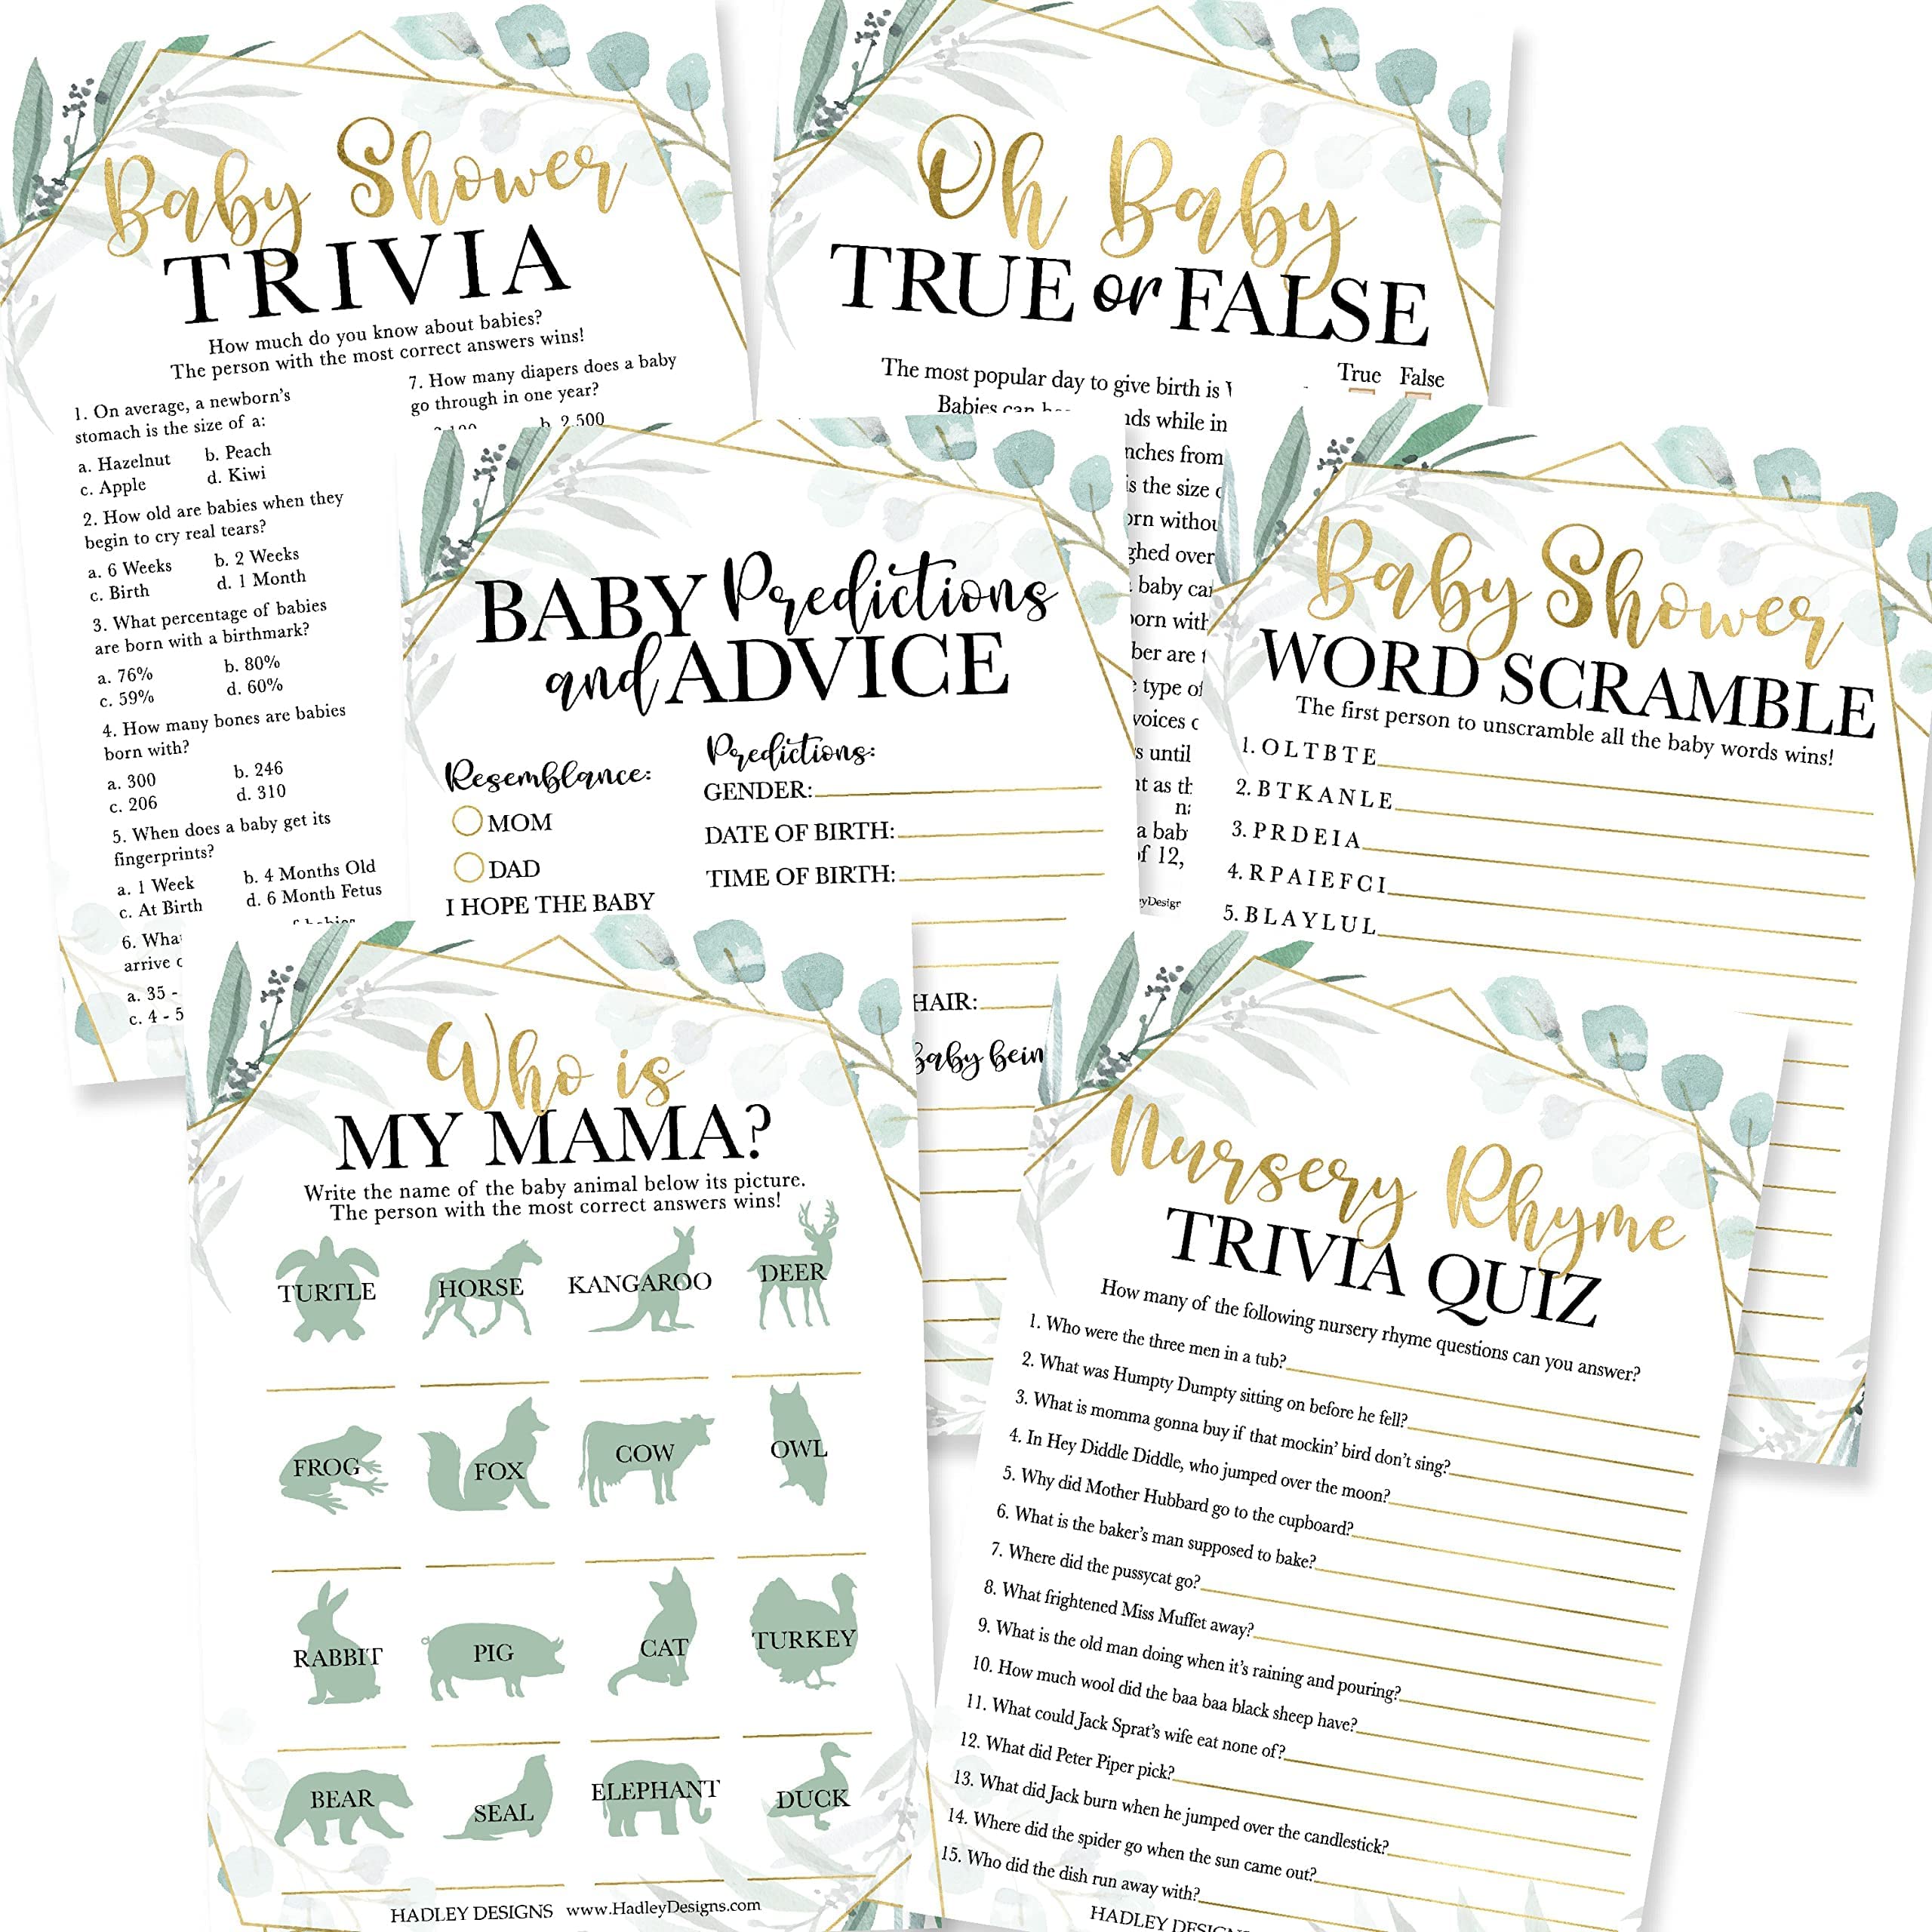 50 Greenery Baby Prediction And Advice Cards, Trivia Games, etc, 25 Baby Animal Matching, Nursery Rhyme Game - 6 Double Sided Cards Baby Shower Games Funny, Baby Shower Ideas Baby Sprinkle Games